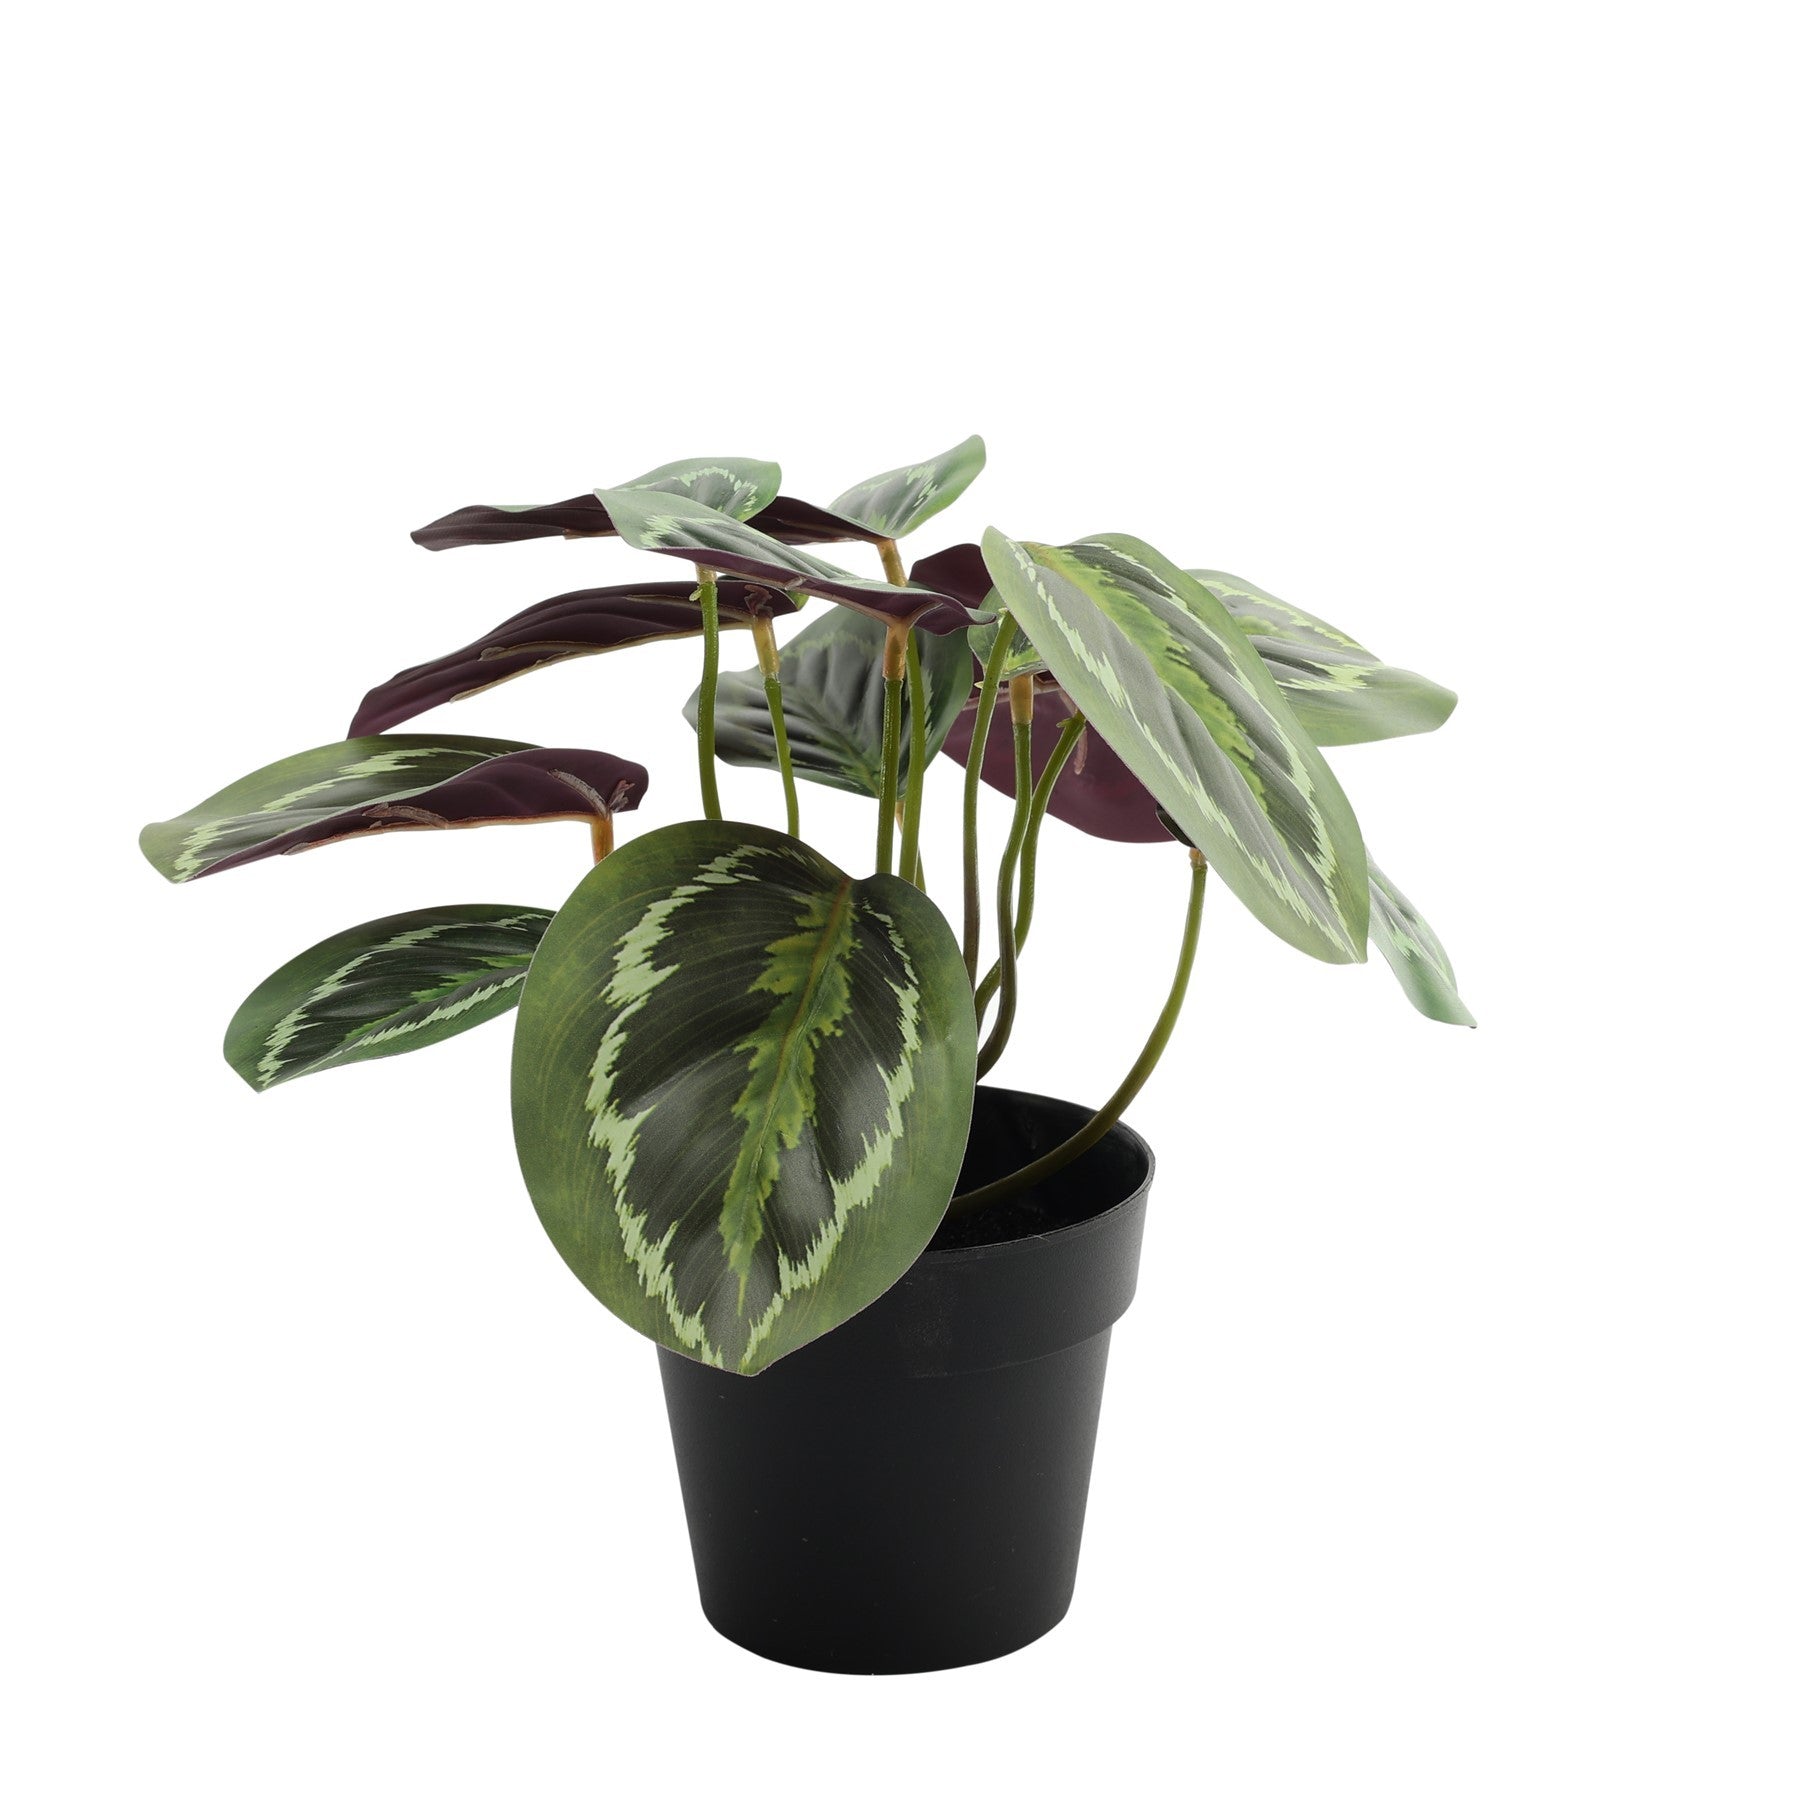 View Calathea House Plant Potted 22cm information